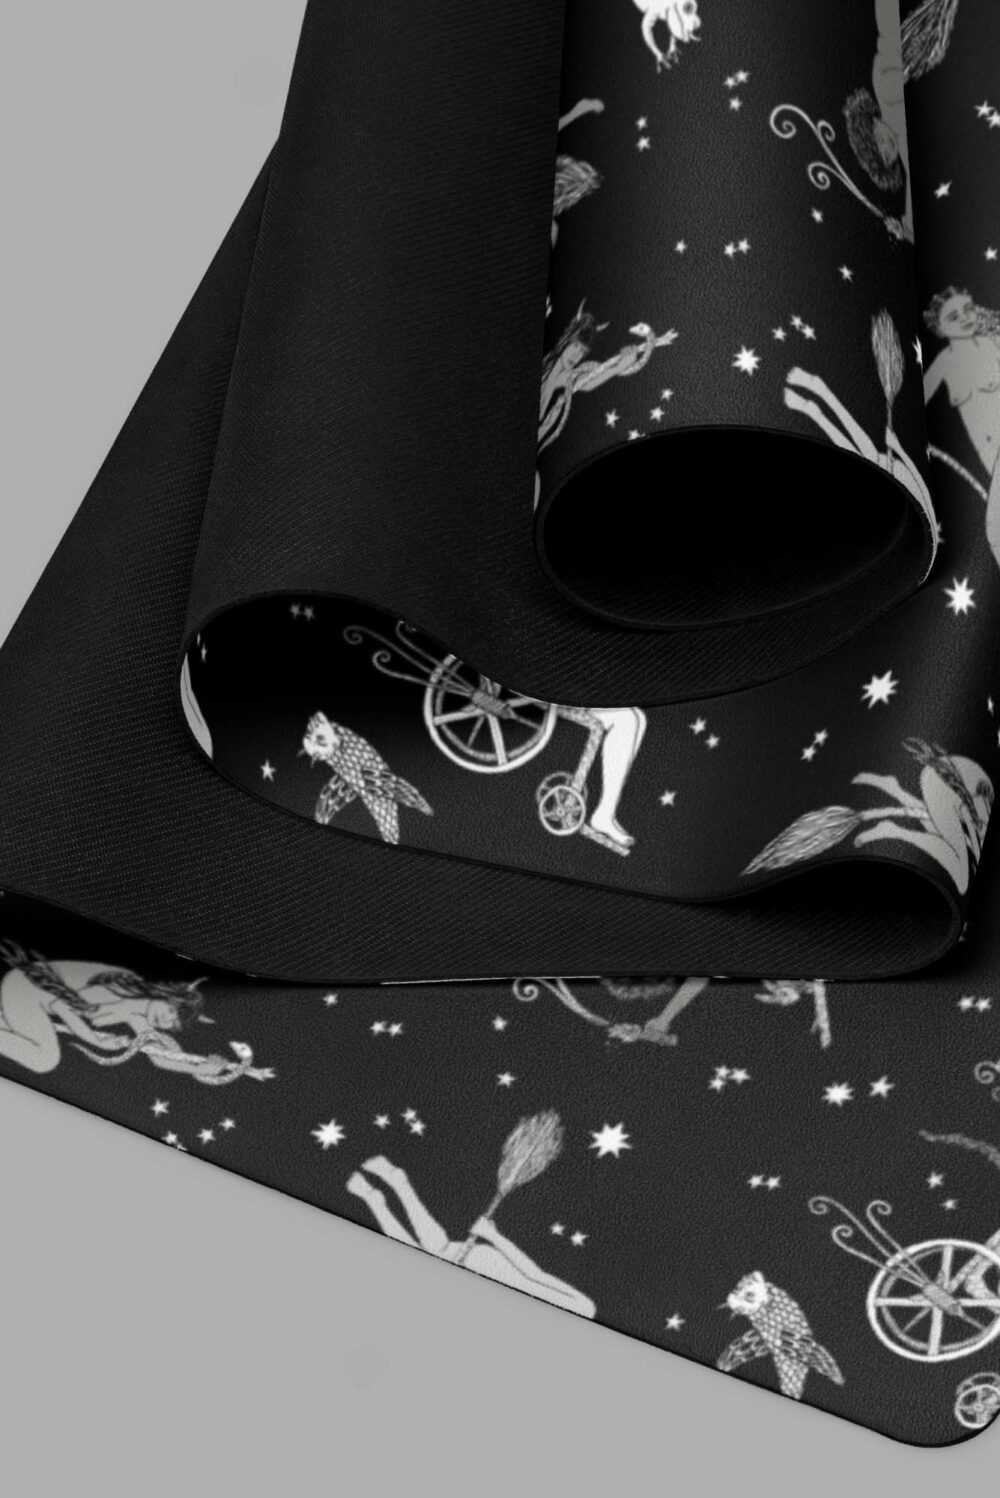 cosmic drifters intersectional witches print yoga mat close